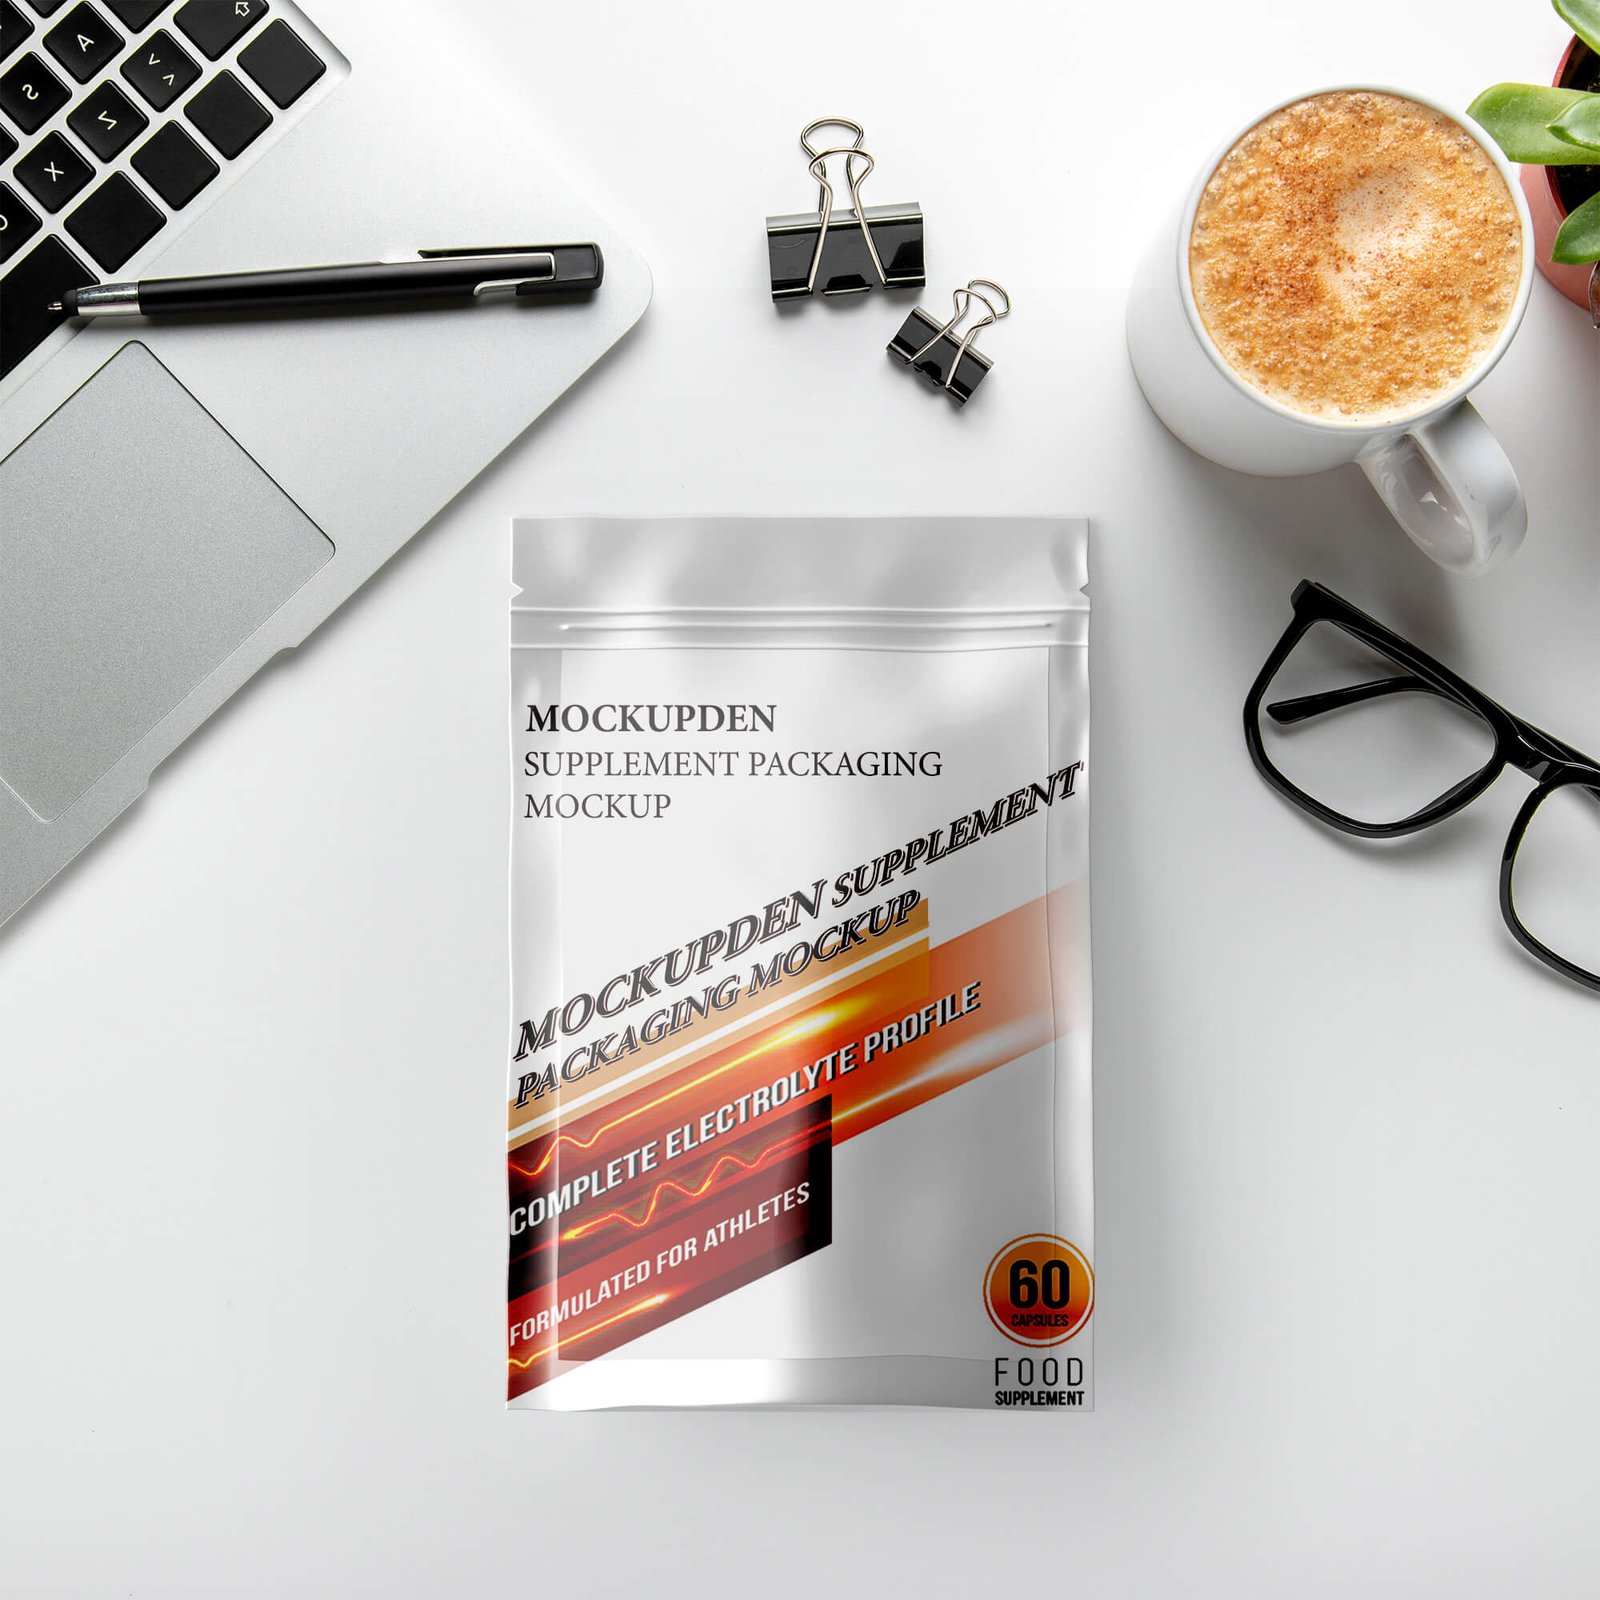 Free Supplement Packaging Mockup PSD Template